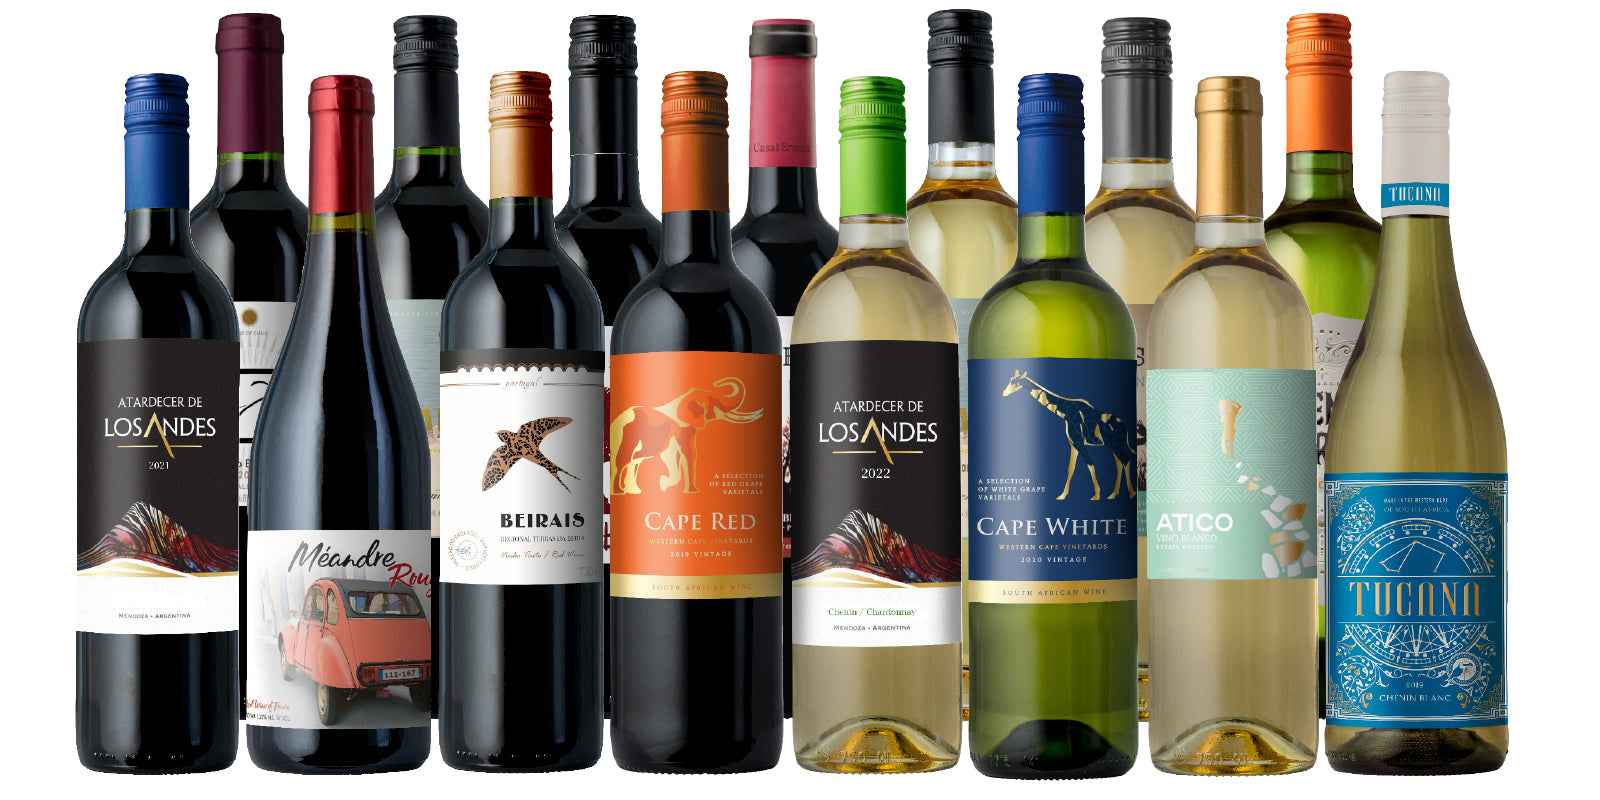 TODAY ONLY UPGRADE: 7s Wild $92.77 Special Vineyard 15-Pack